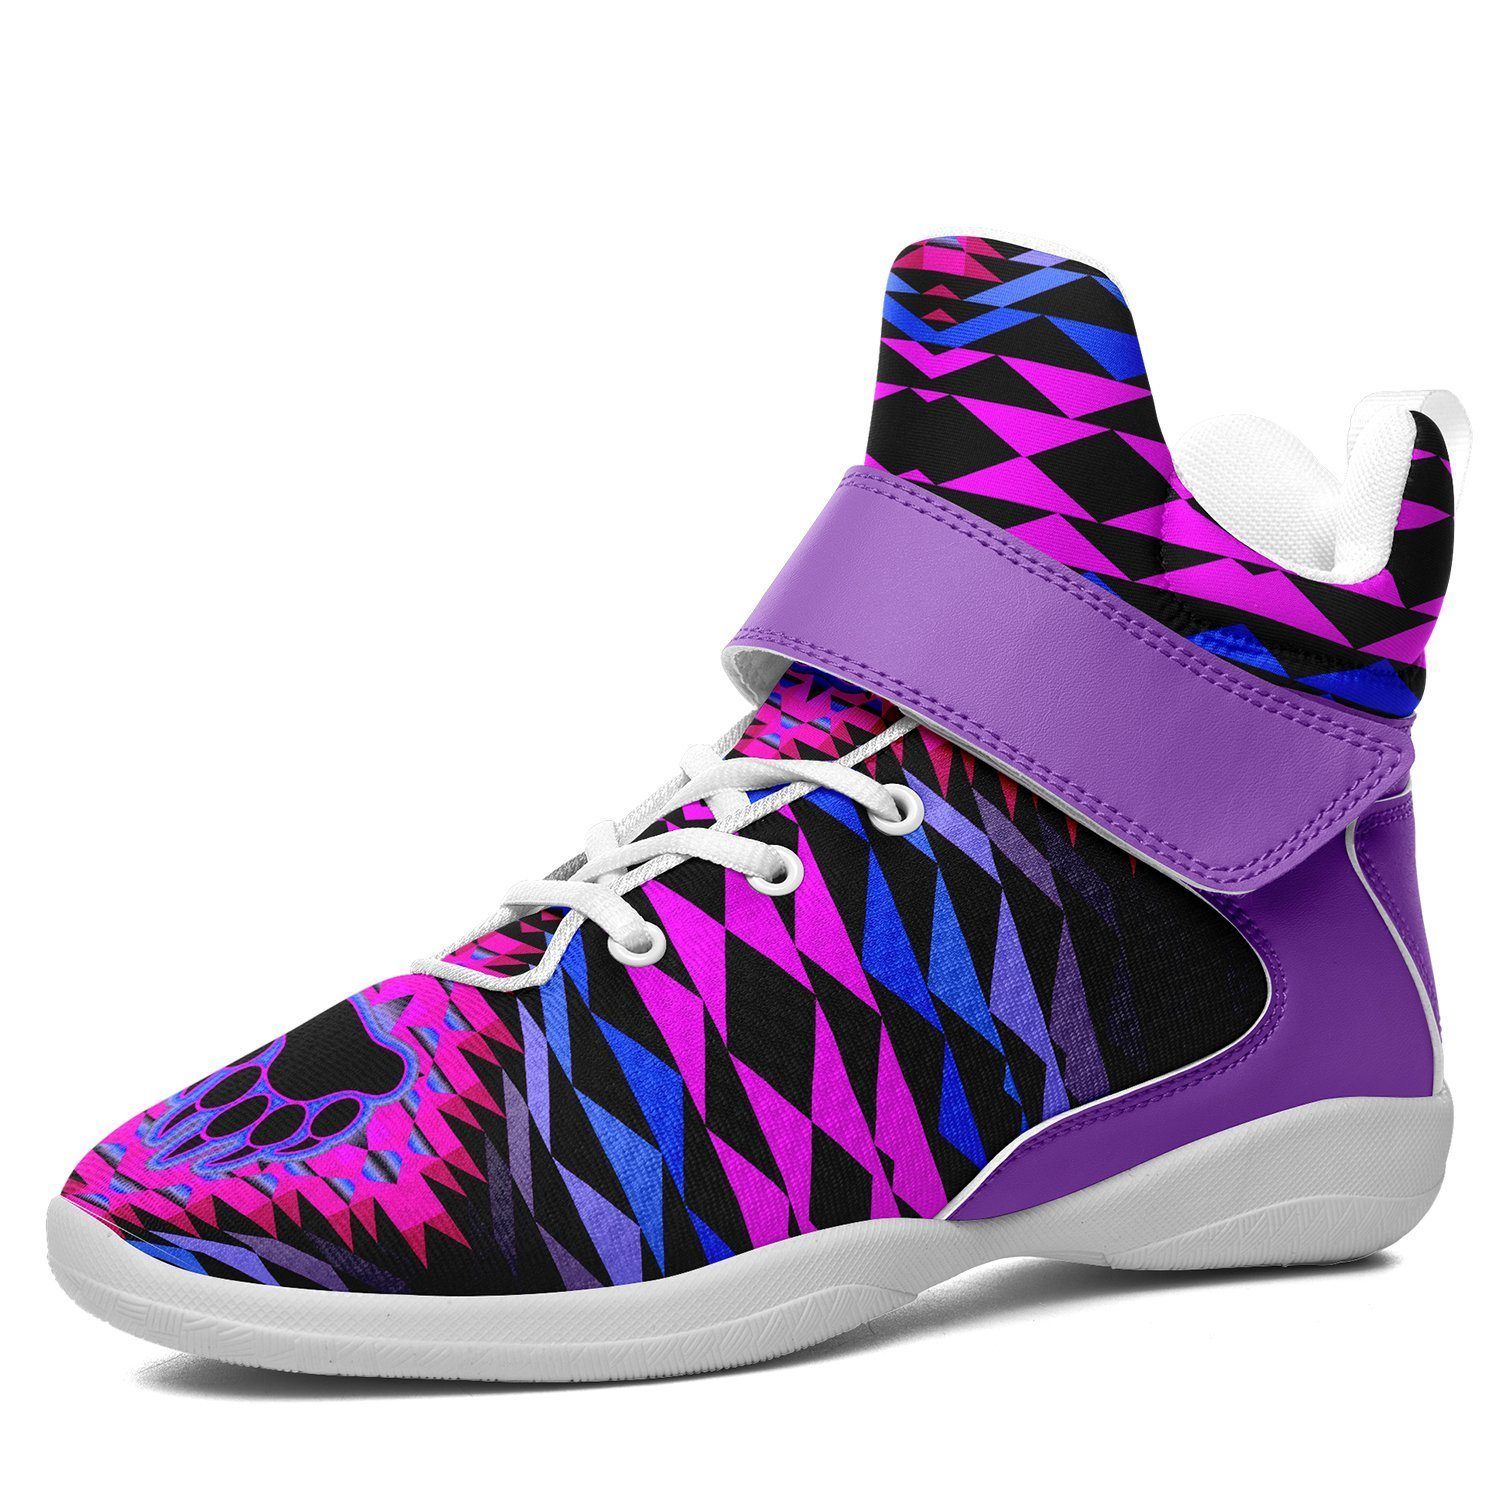 Sunset Bearpaw Blanket Pink Ipottaa Basketball / Sport High Top Shoes - White Sole 49 Dzine US Men 7 / EUR 40 White Sole with Lavender Strap 